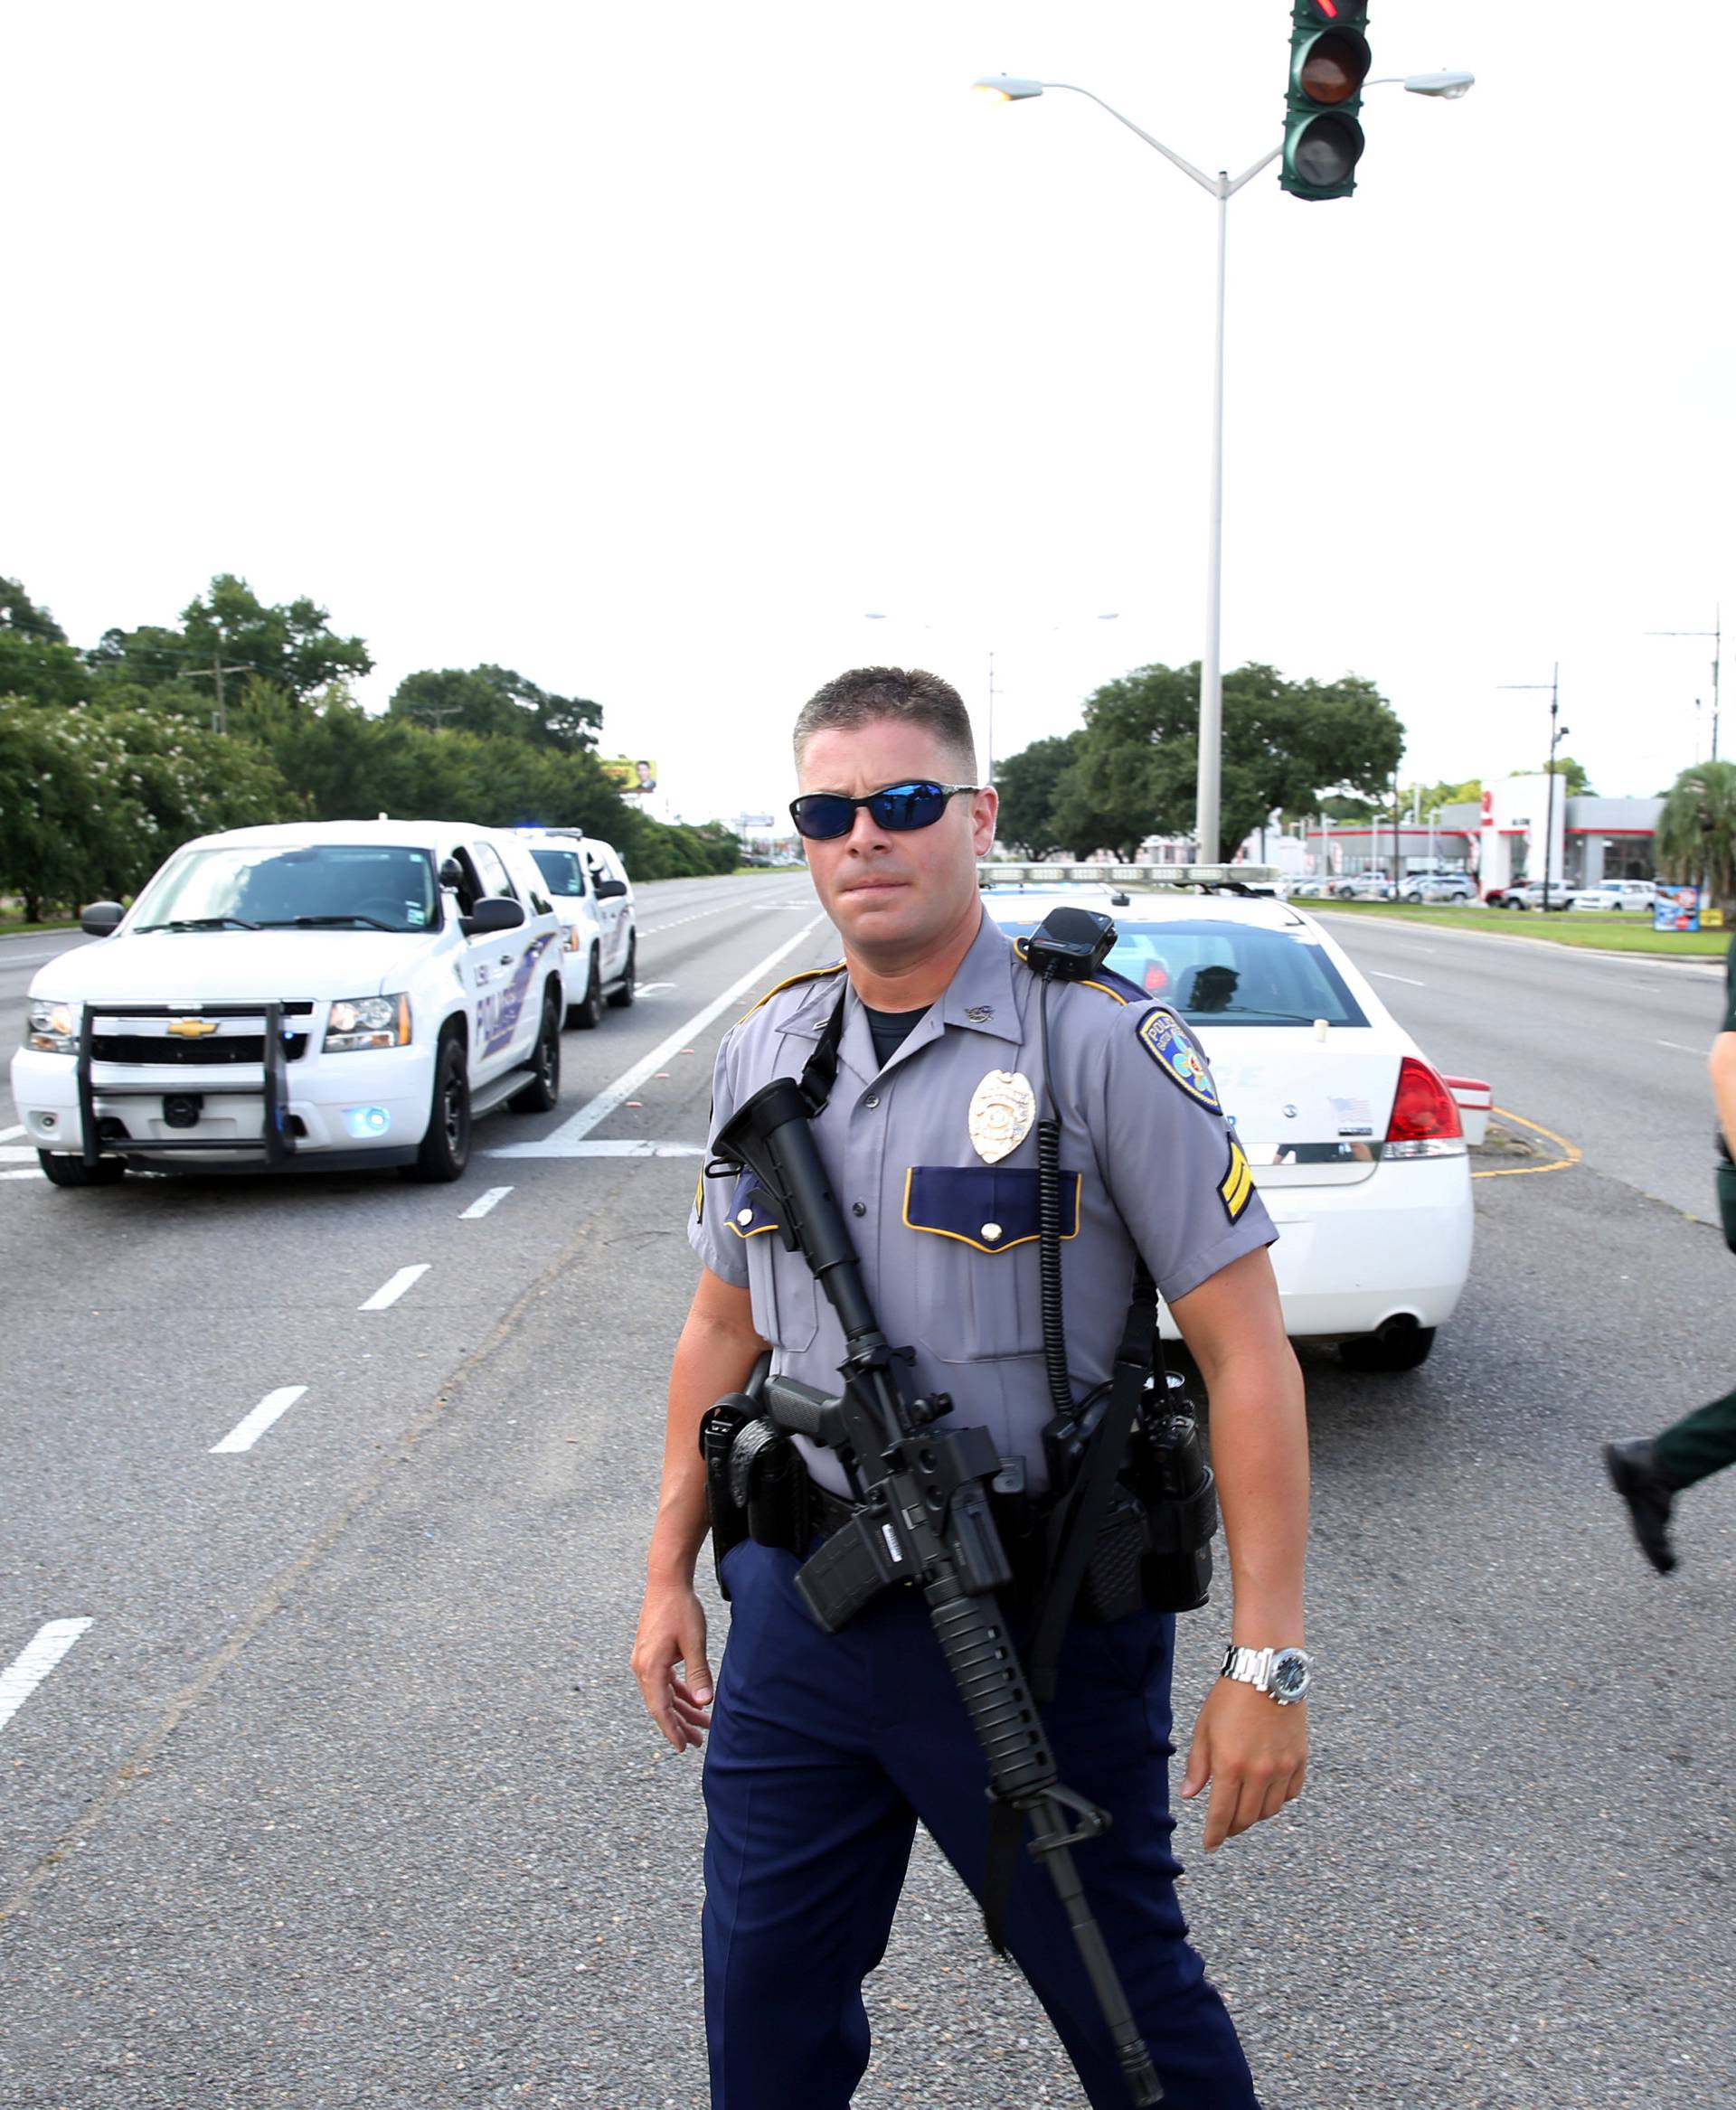 Police officers block off a road after a shooting of police in Baton Rouge